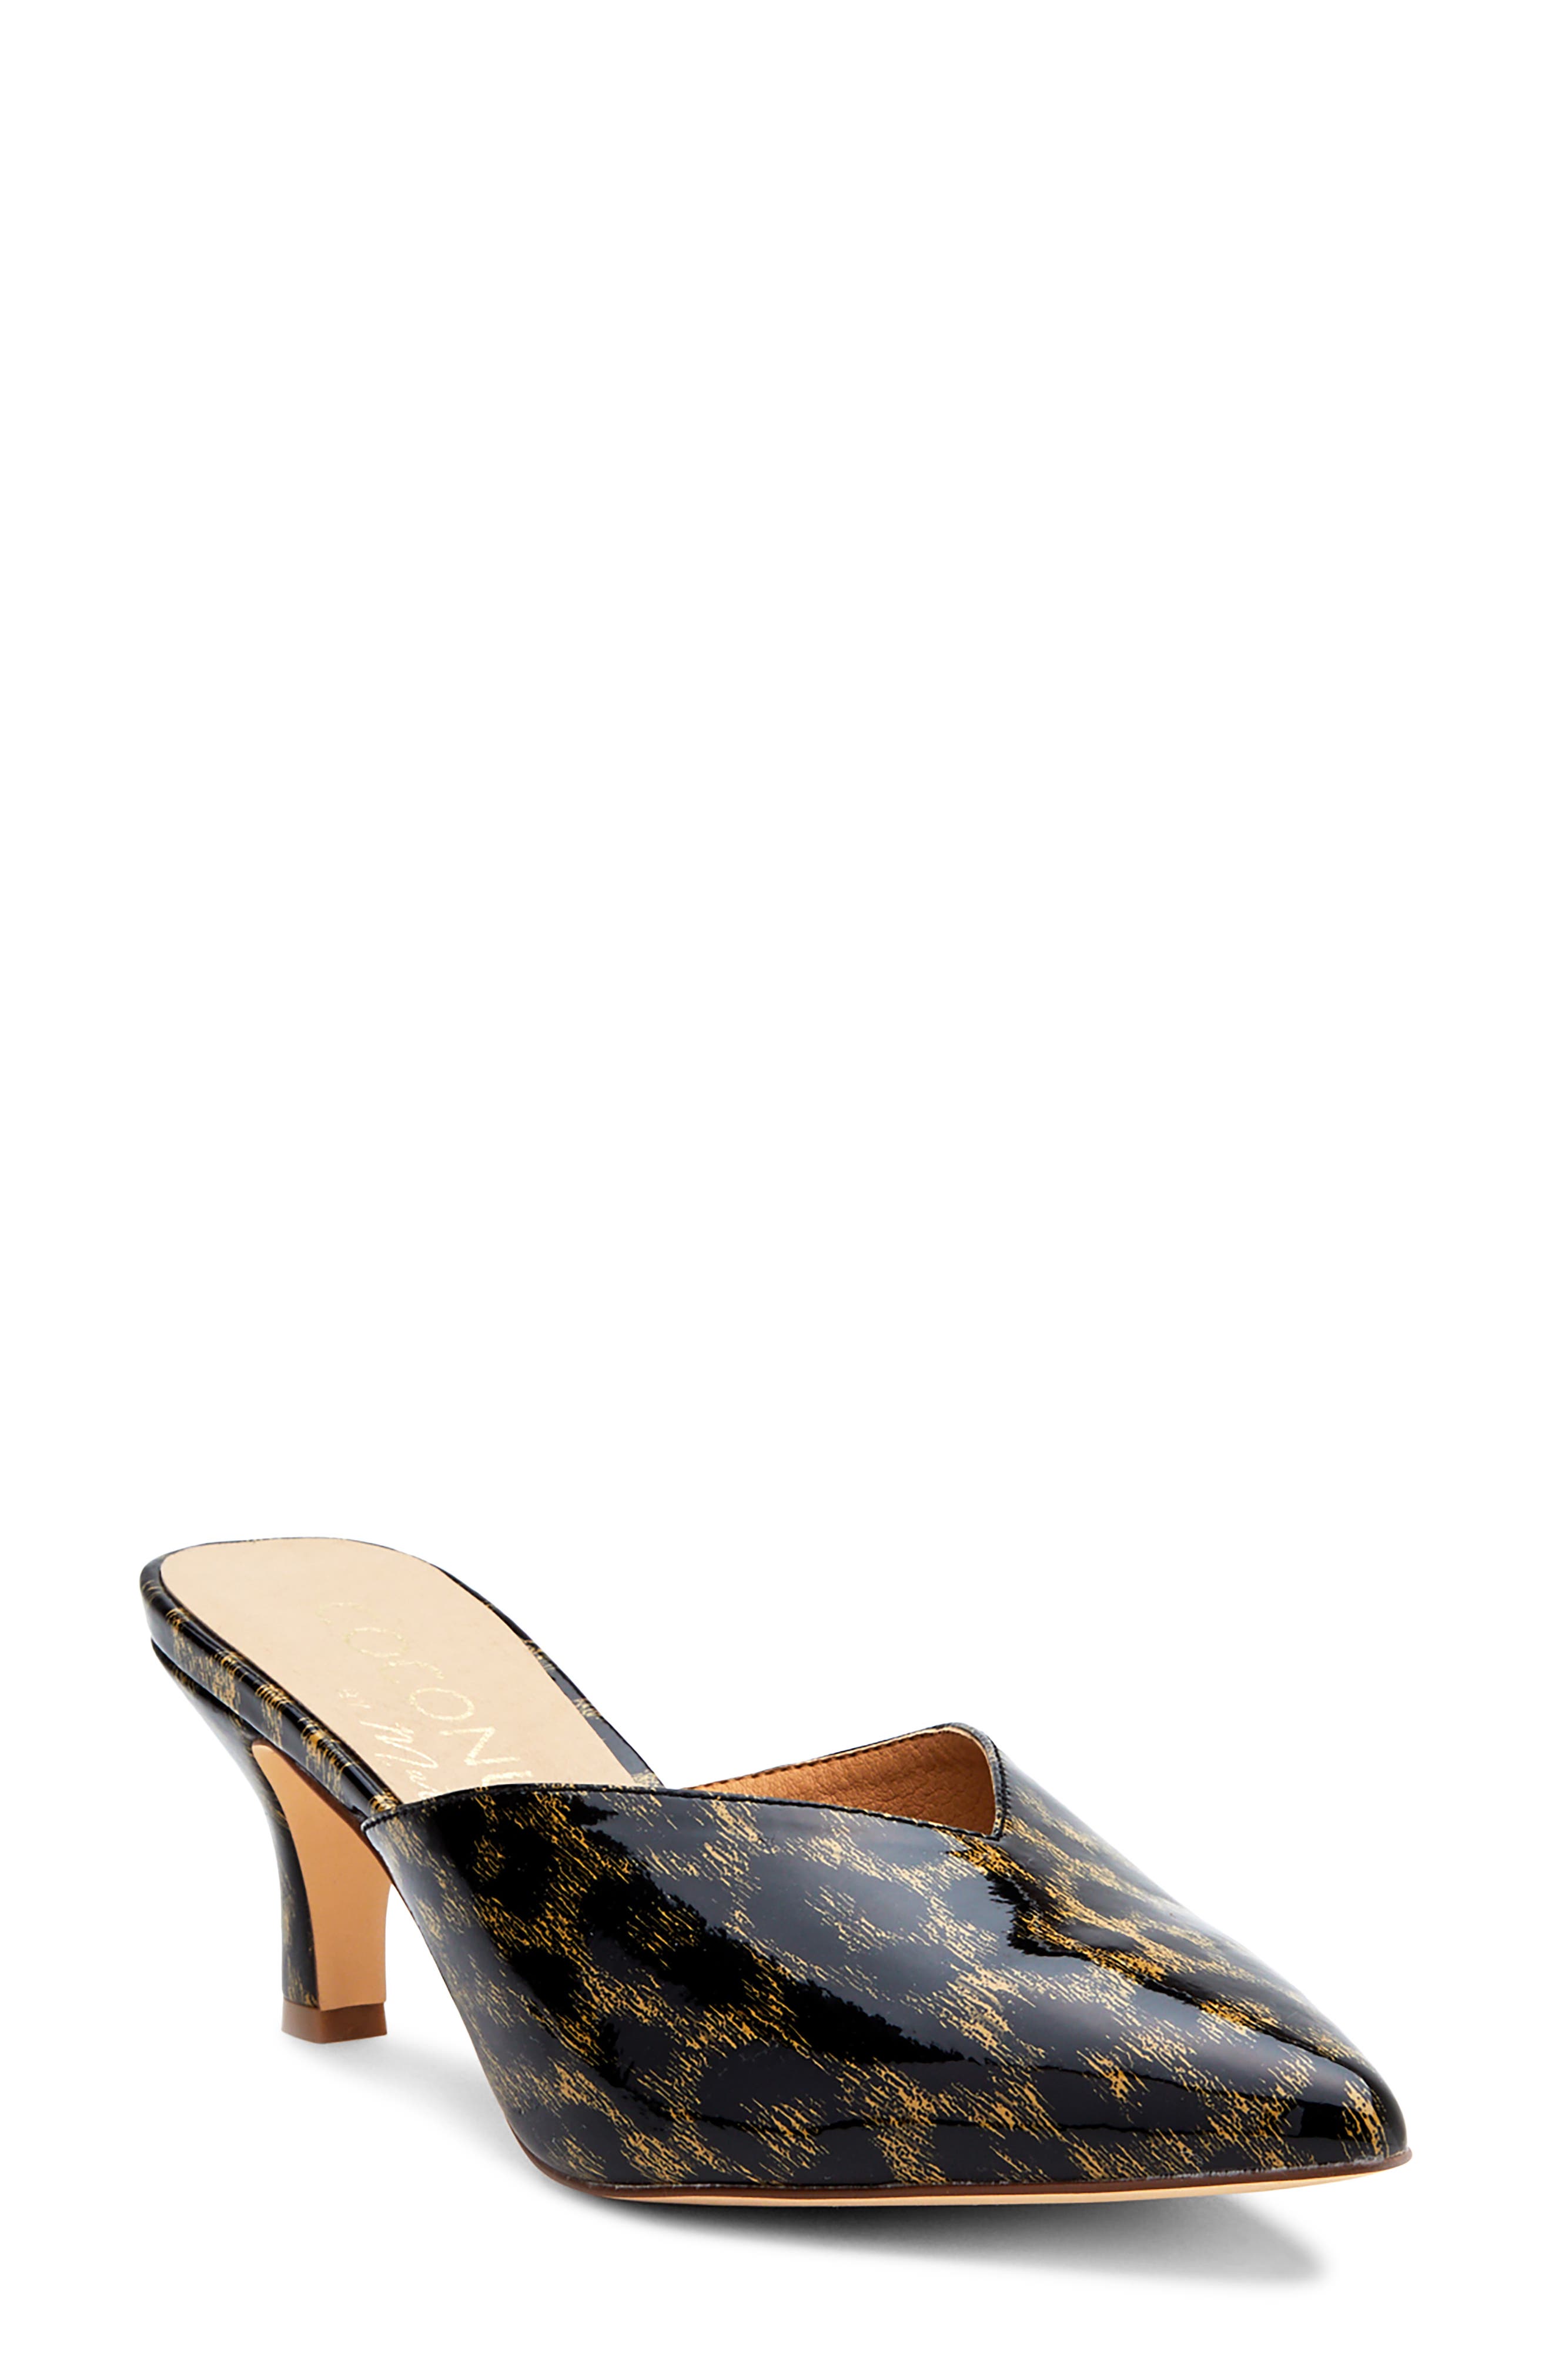 nordstrom animal print shoes